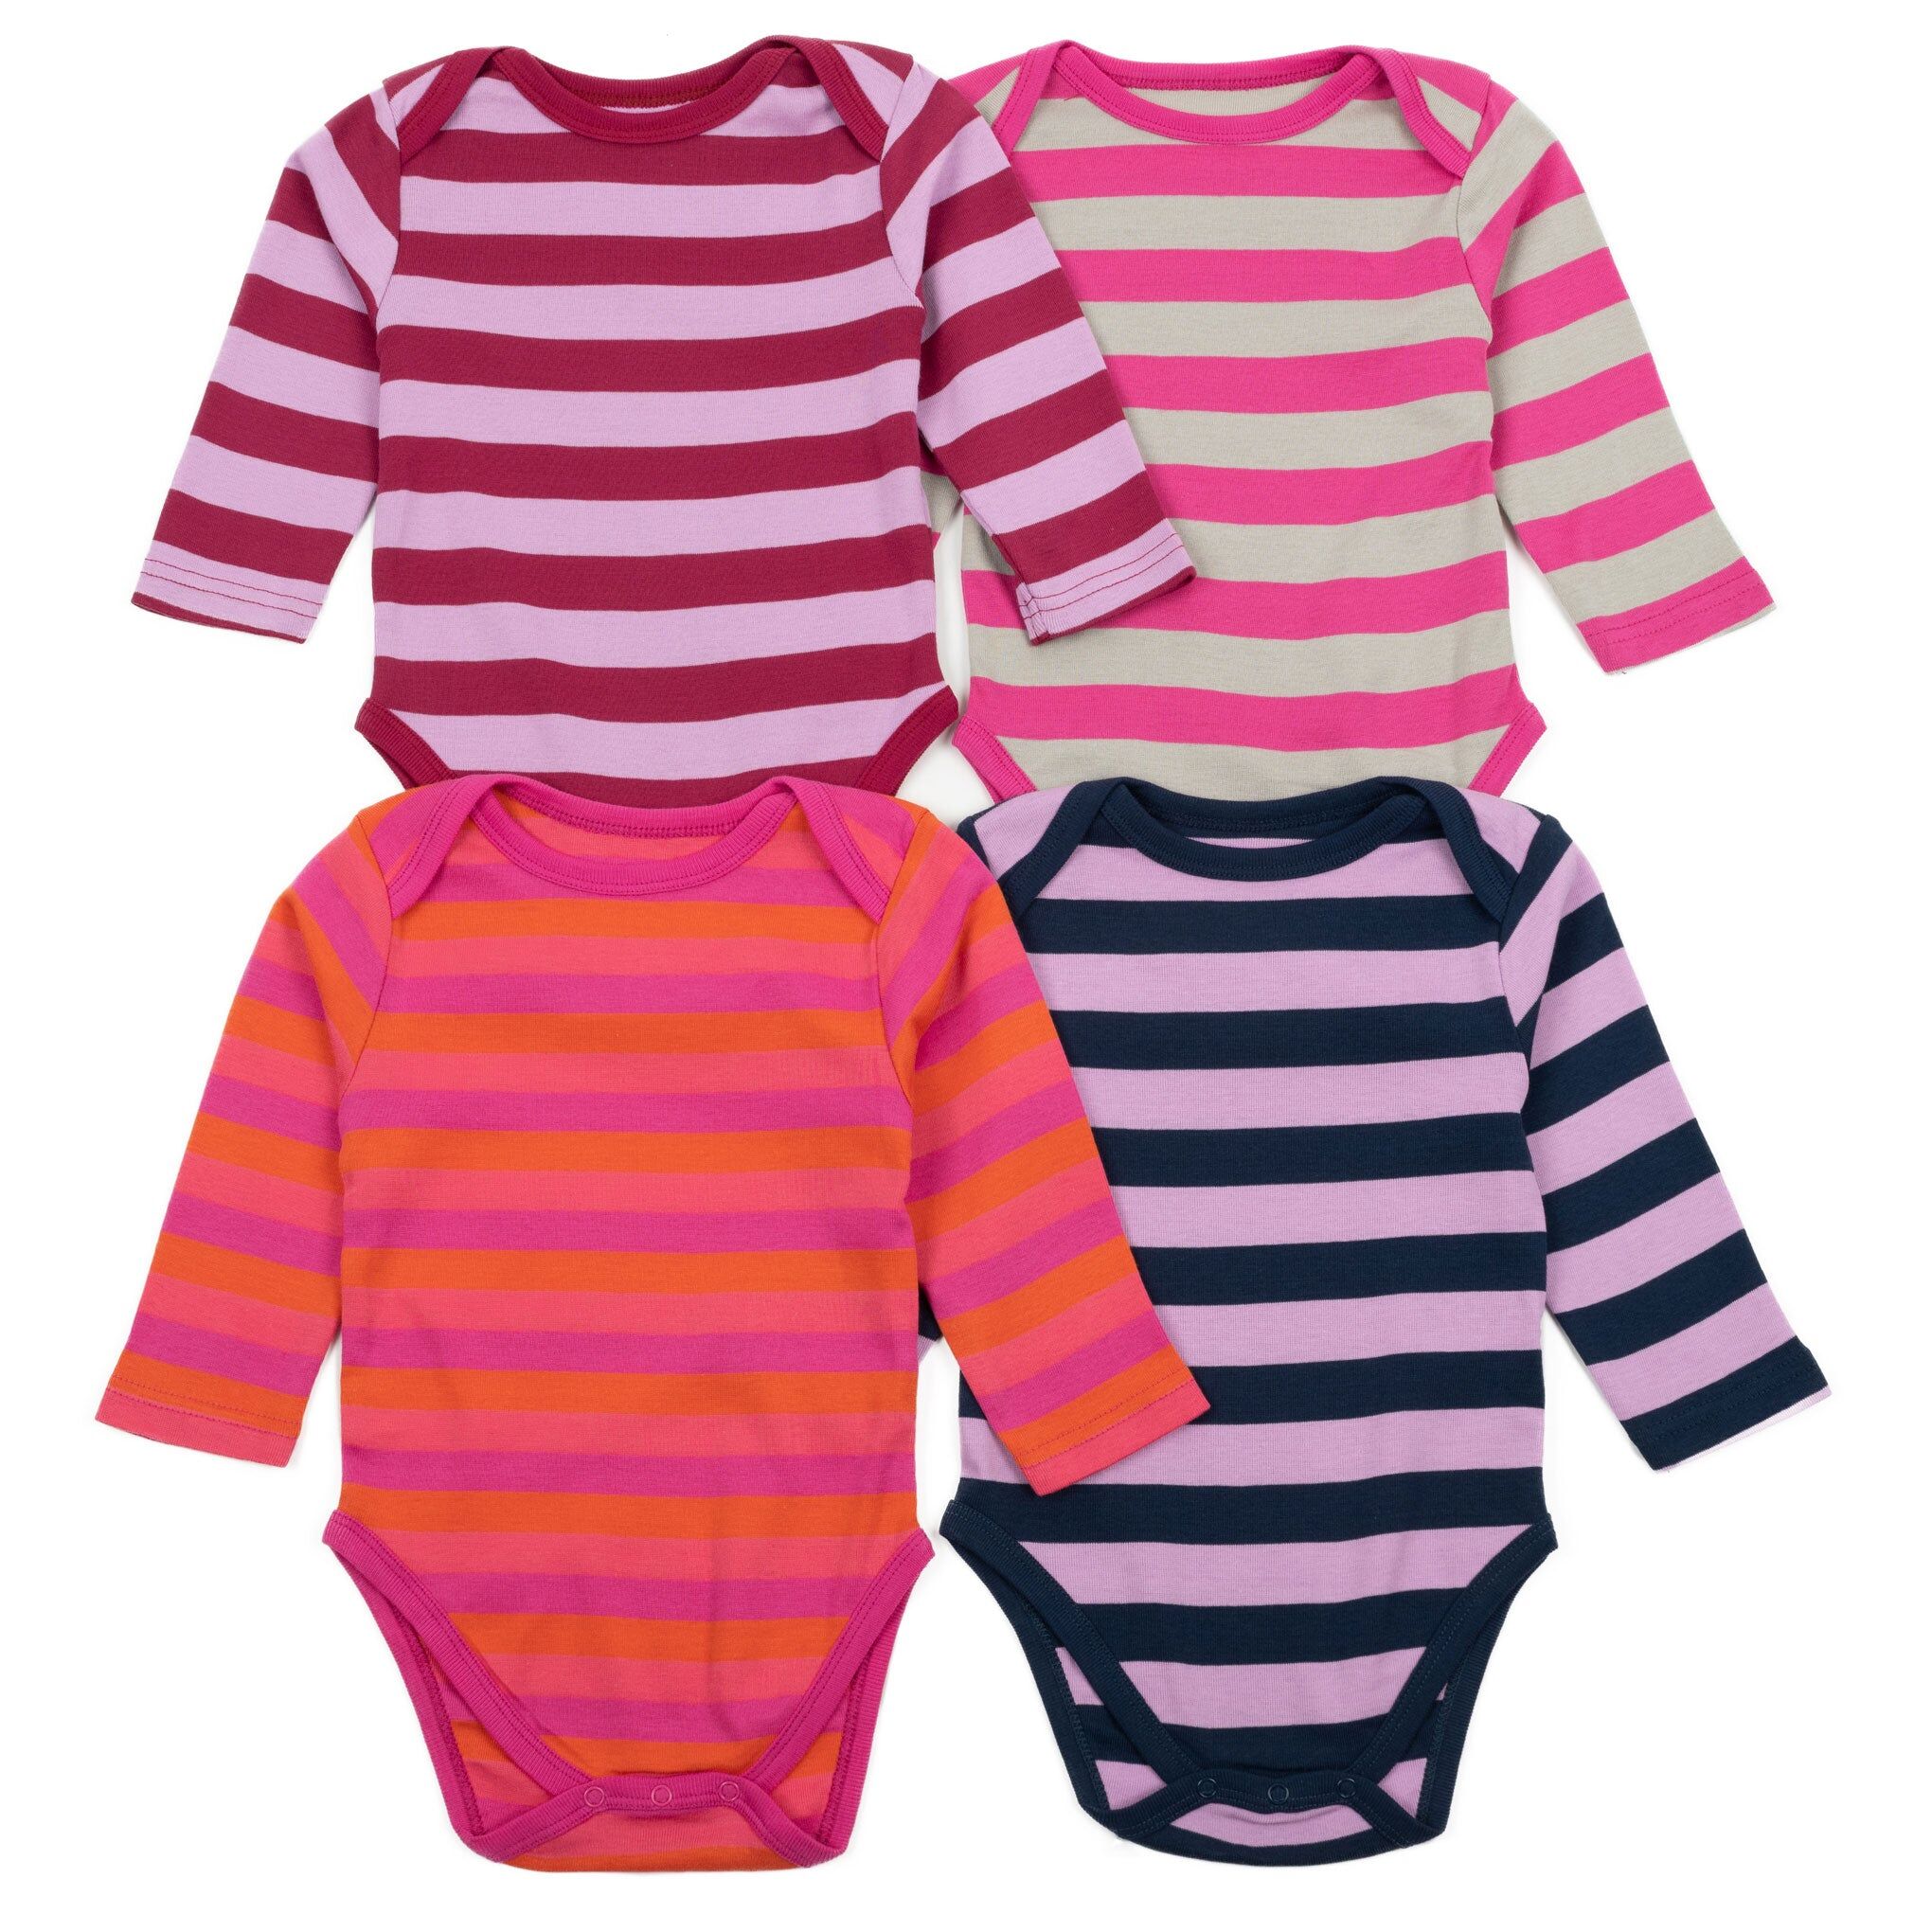 Leveret Baby Four Pack Long Sleeve Bodysuit 12-18 Months